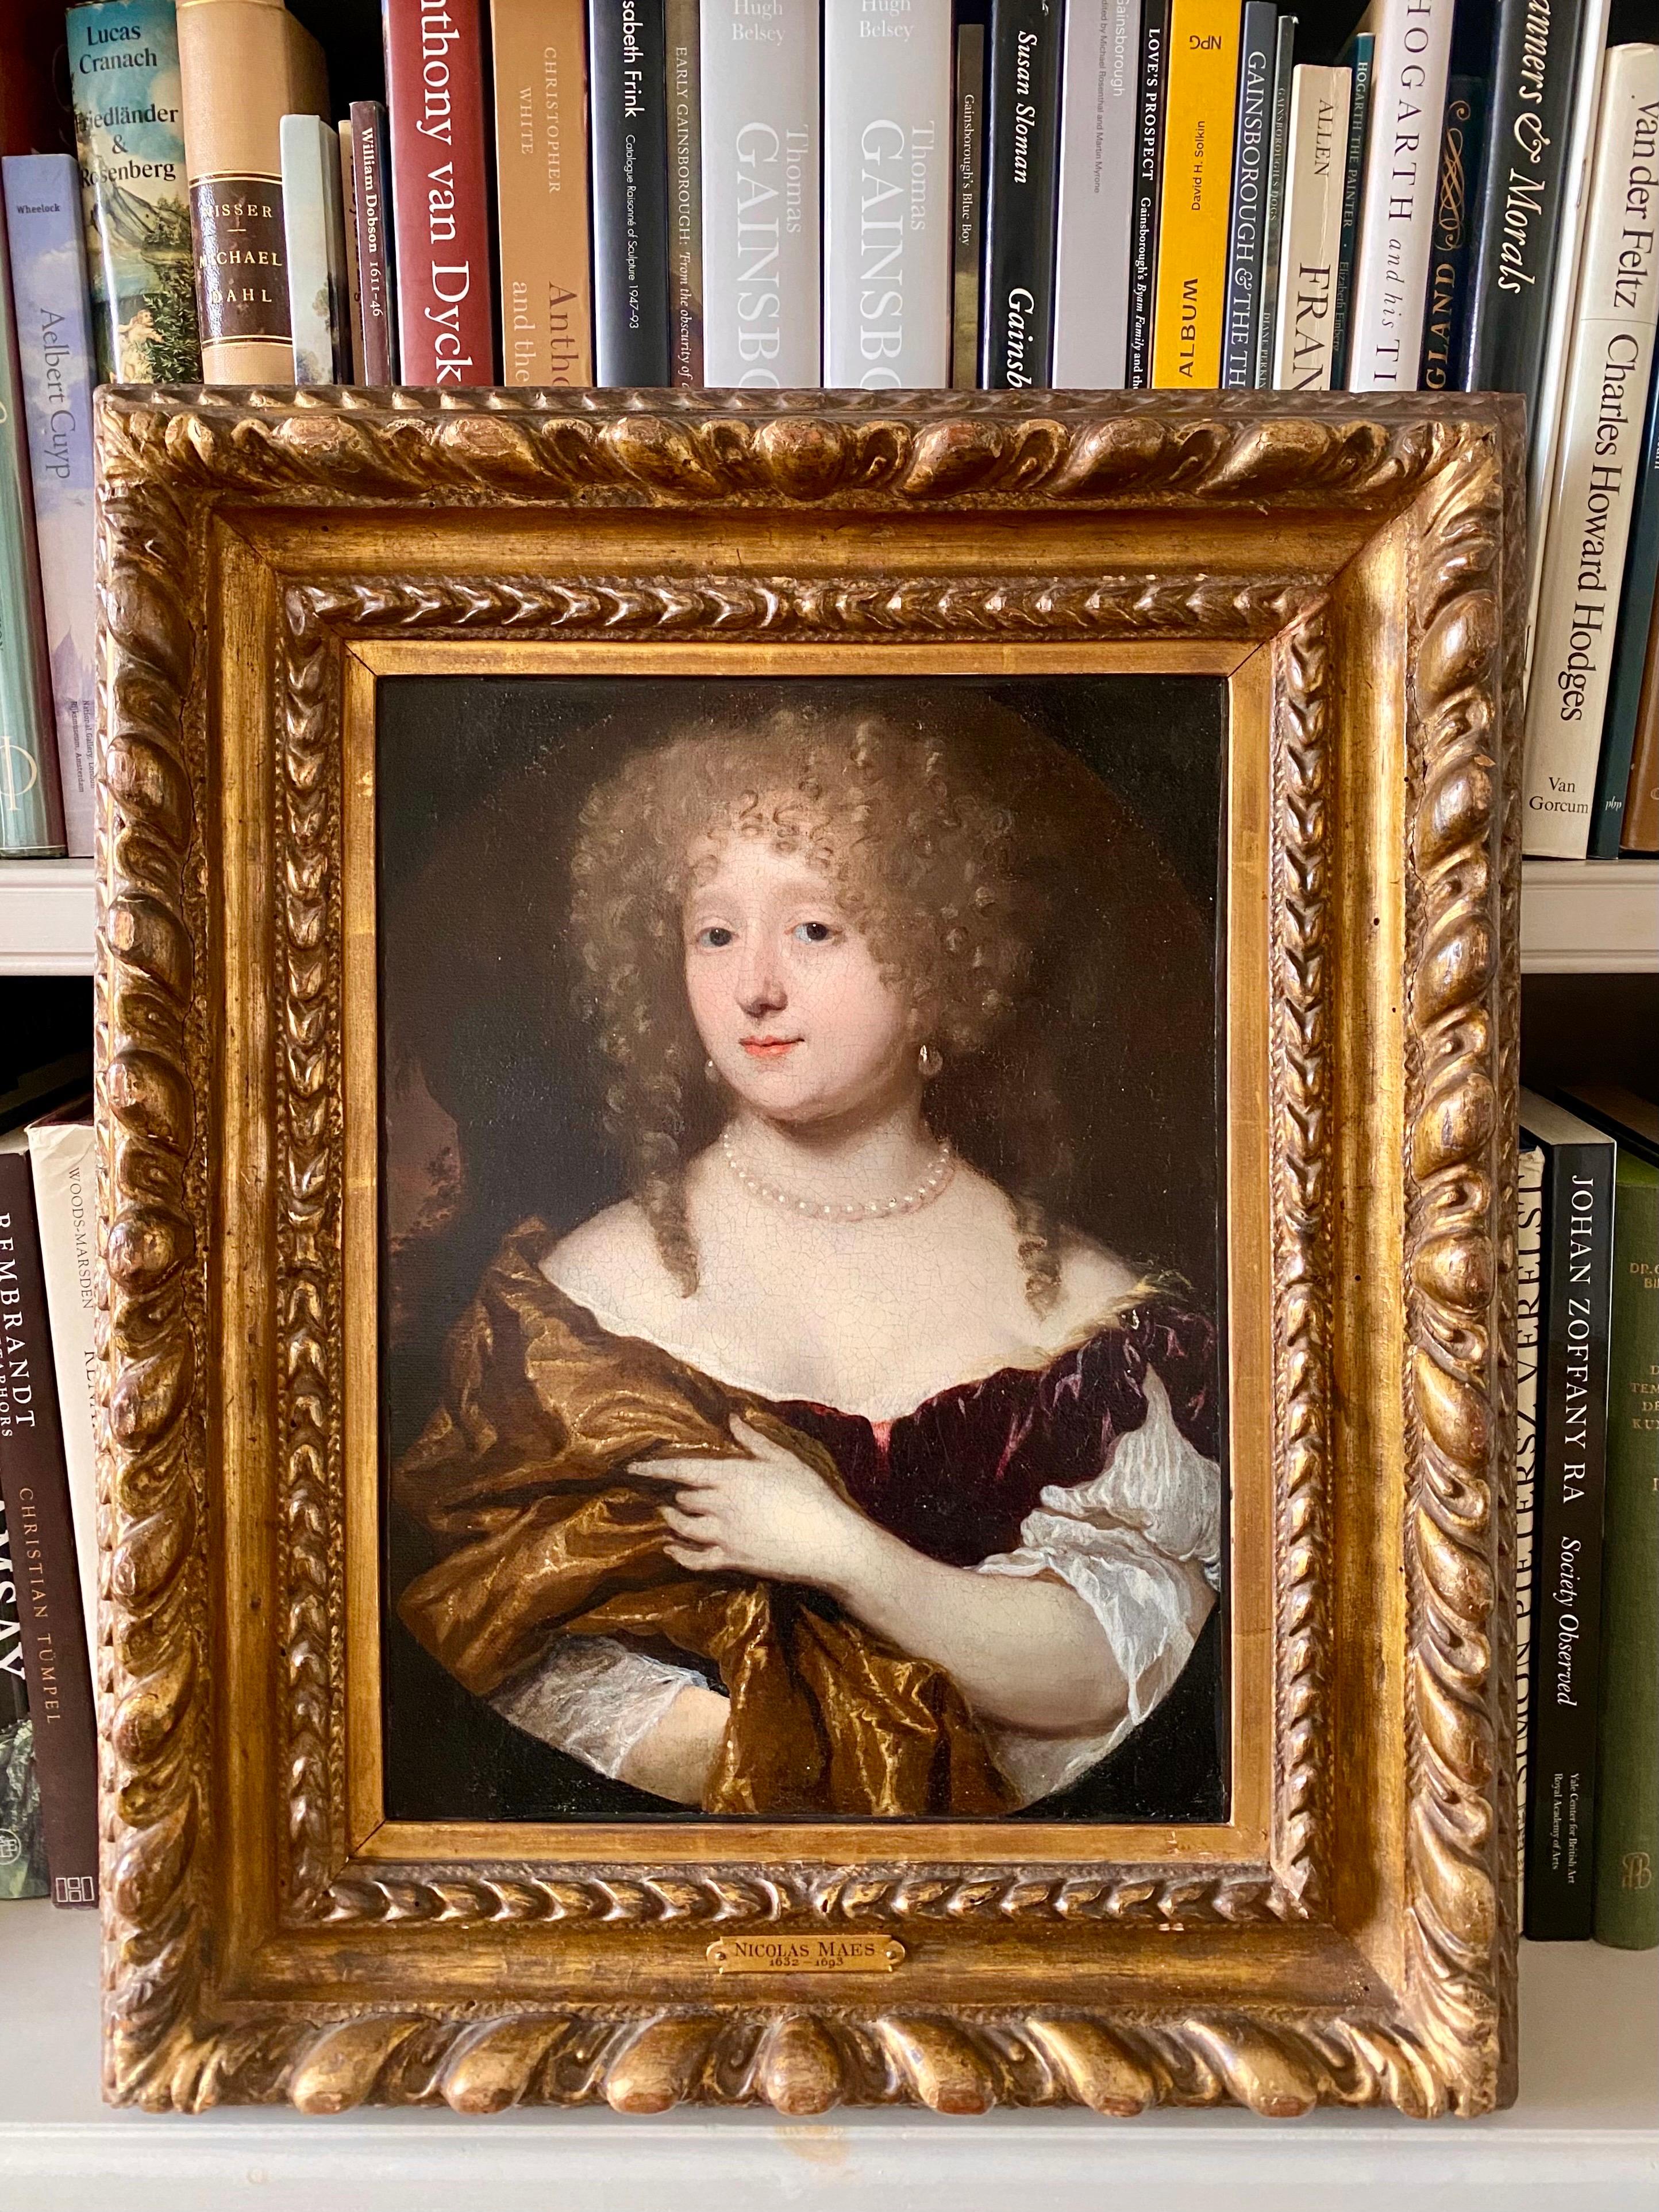 17th century portrait of a lady - Old Masters Painting by Nicolaes Maes